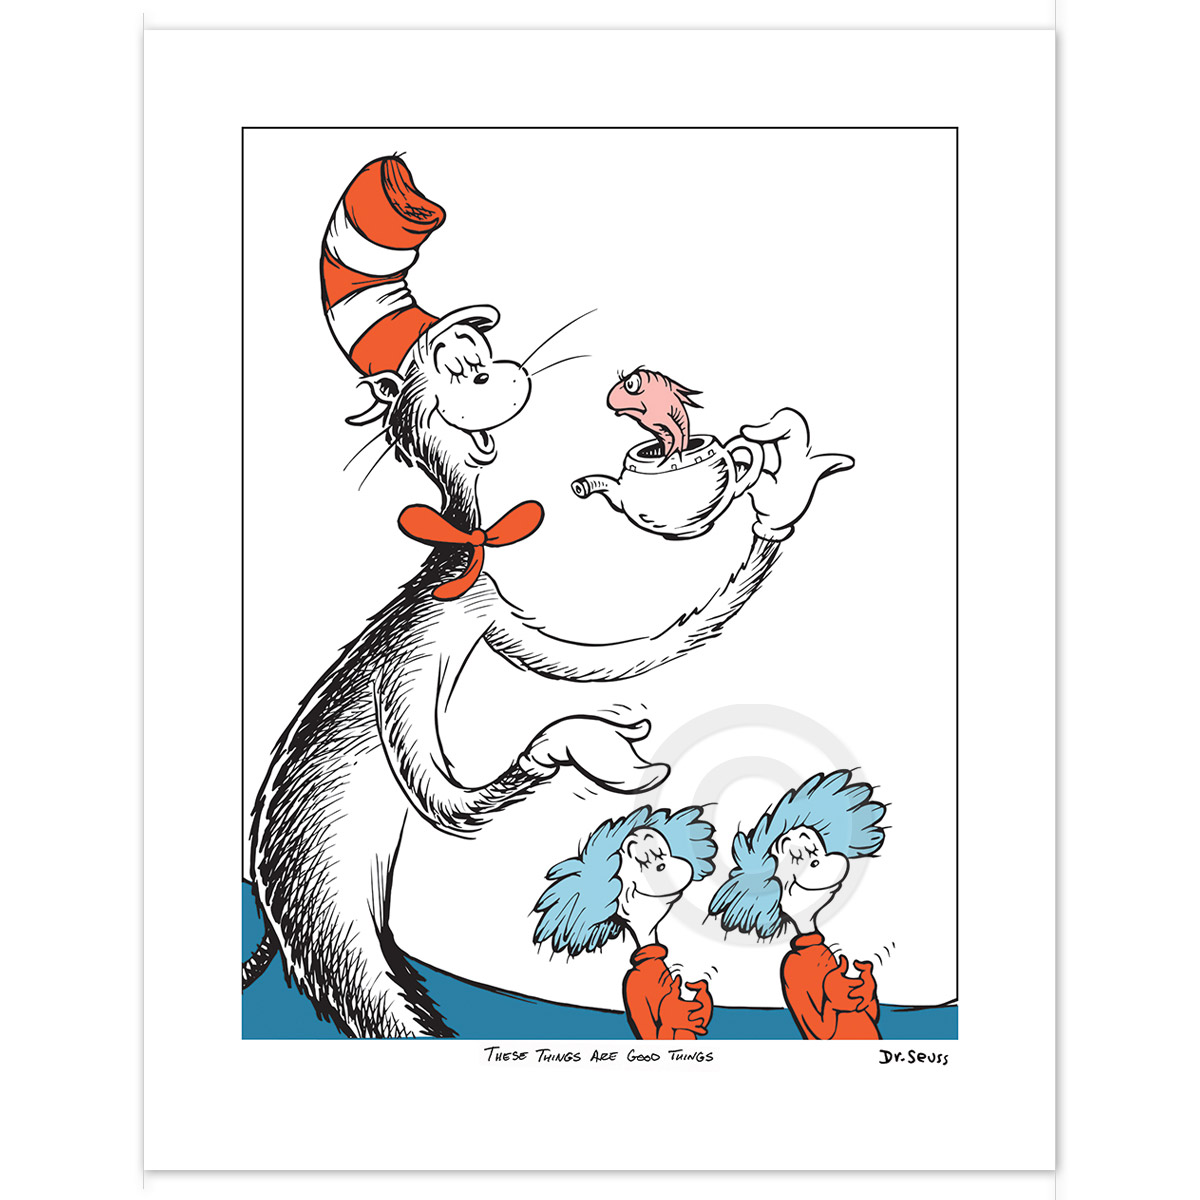 These Things Are Good Things — The Art of Dr. Seuss Collection, Published  by Chaseart Companies